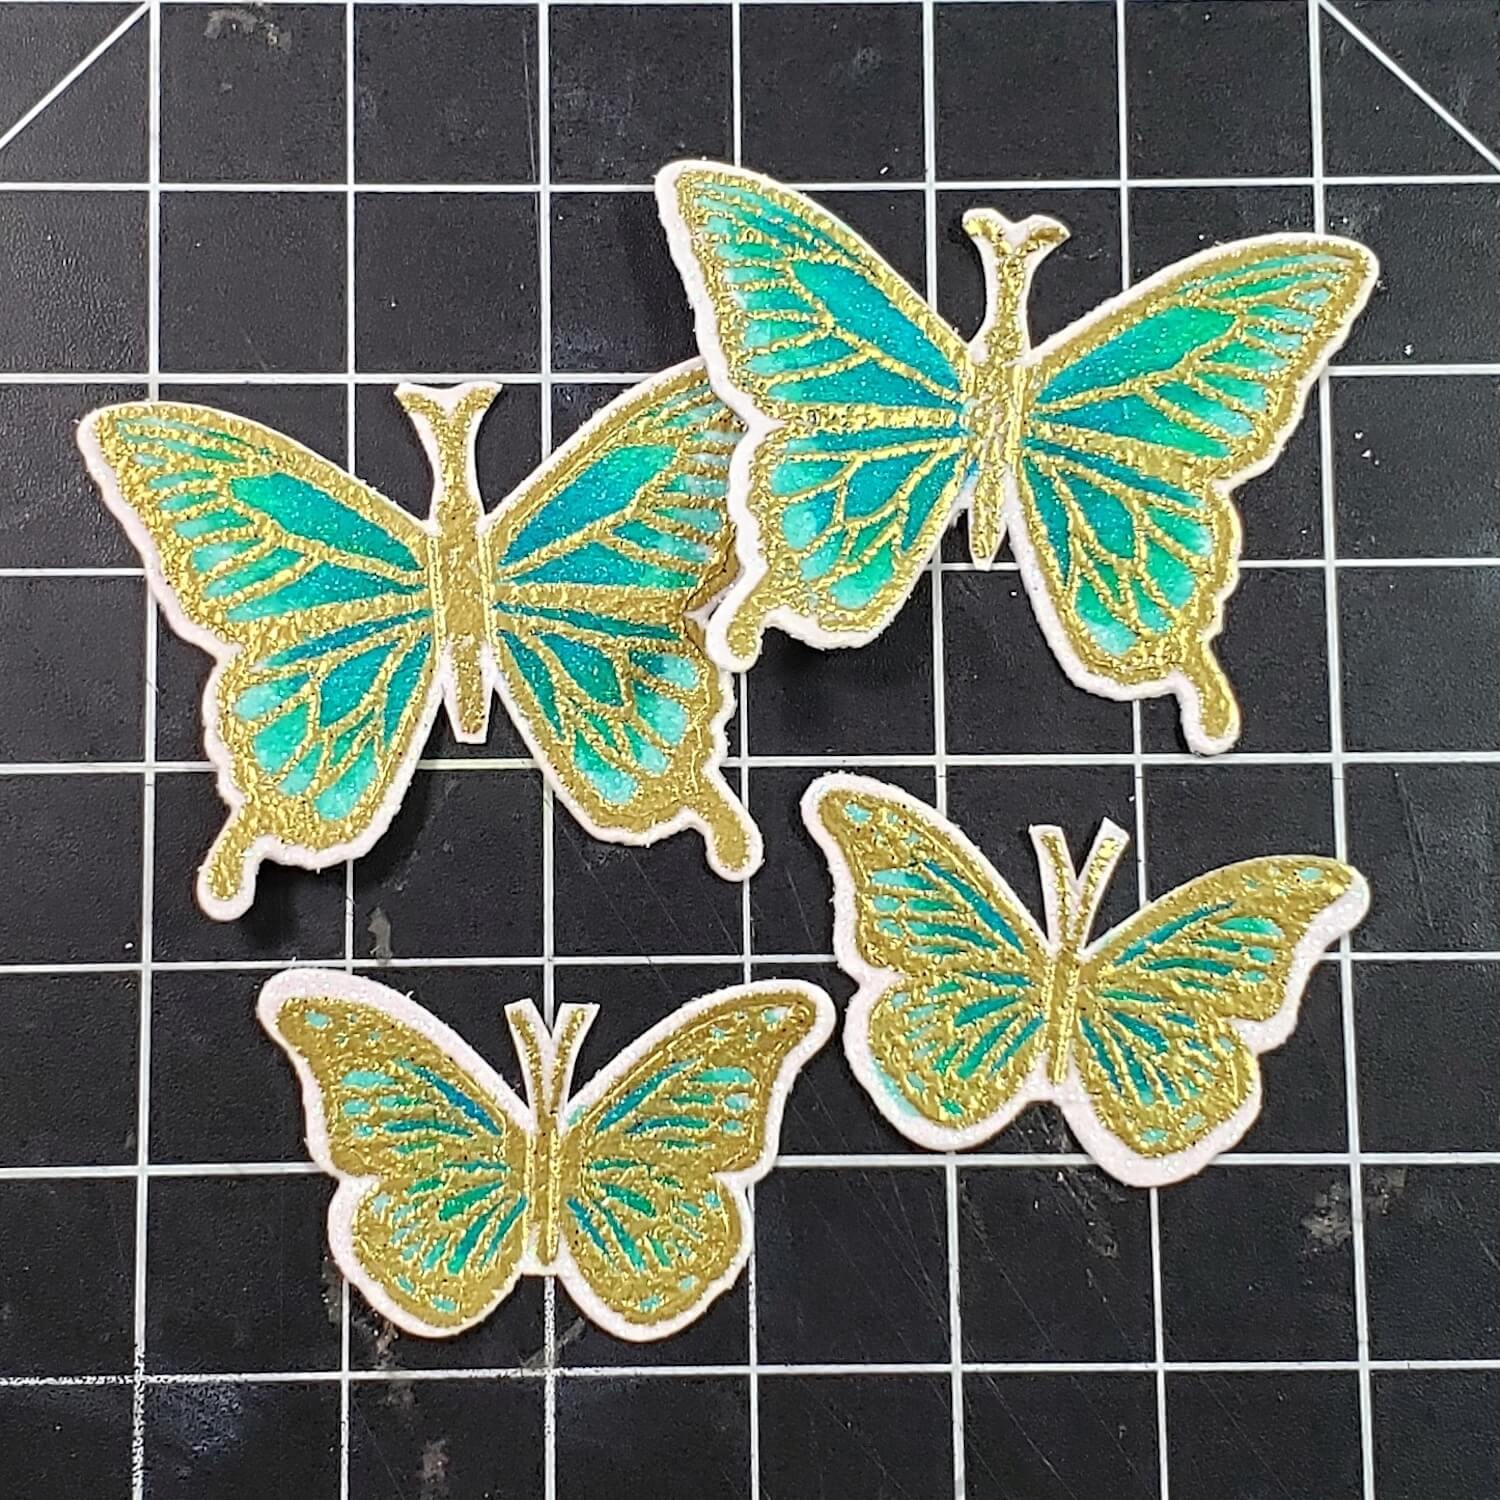 Stamped, embossed, and colored butterflies